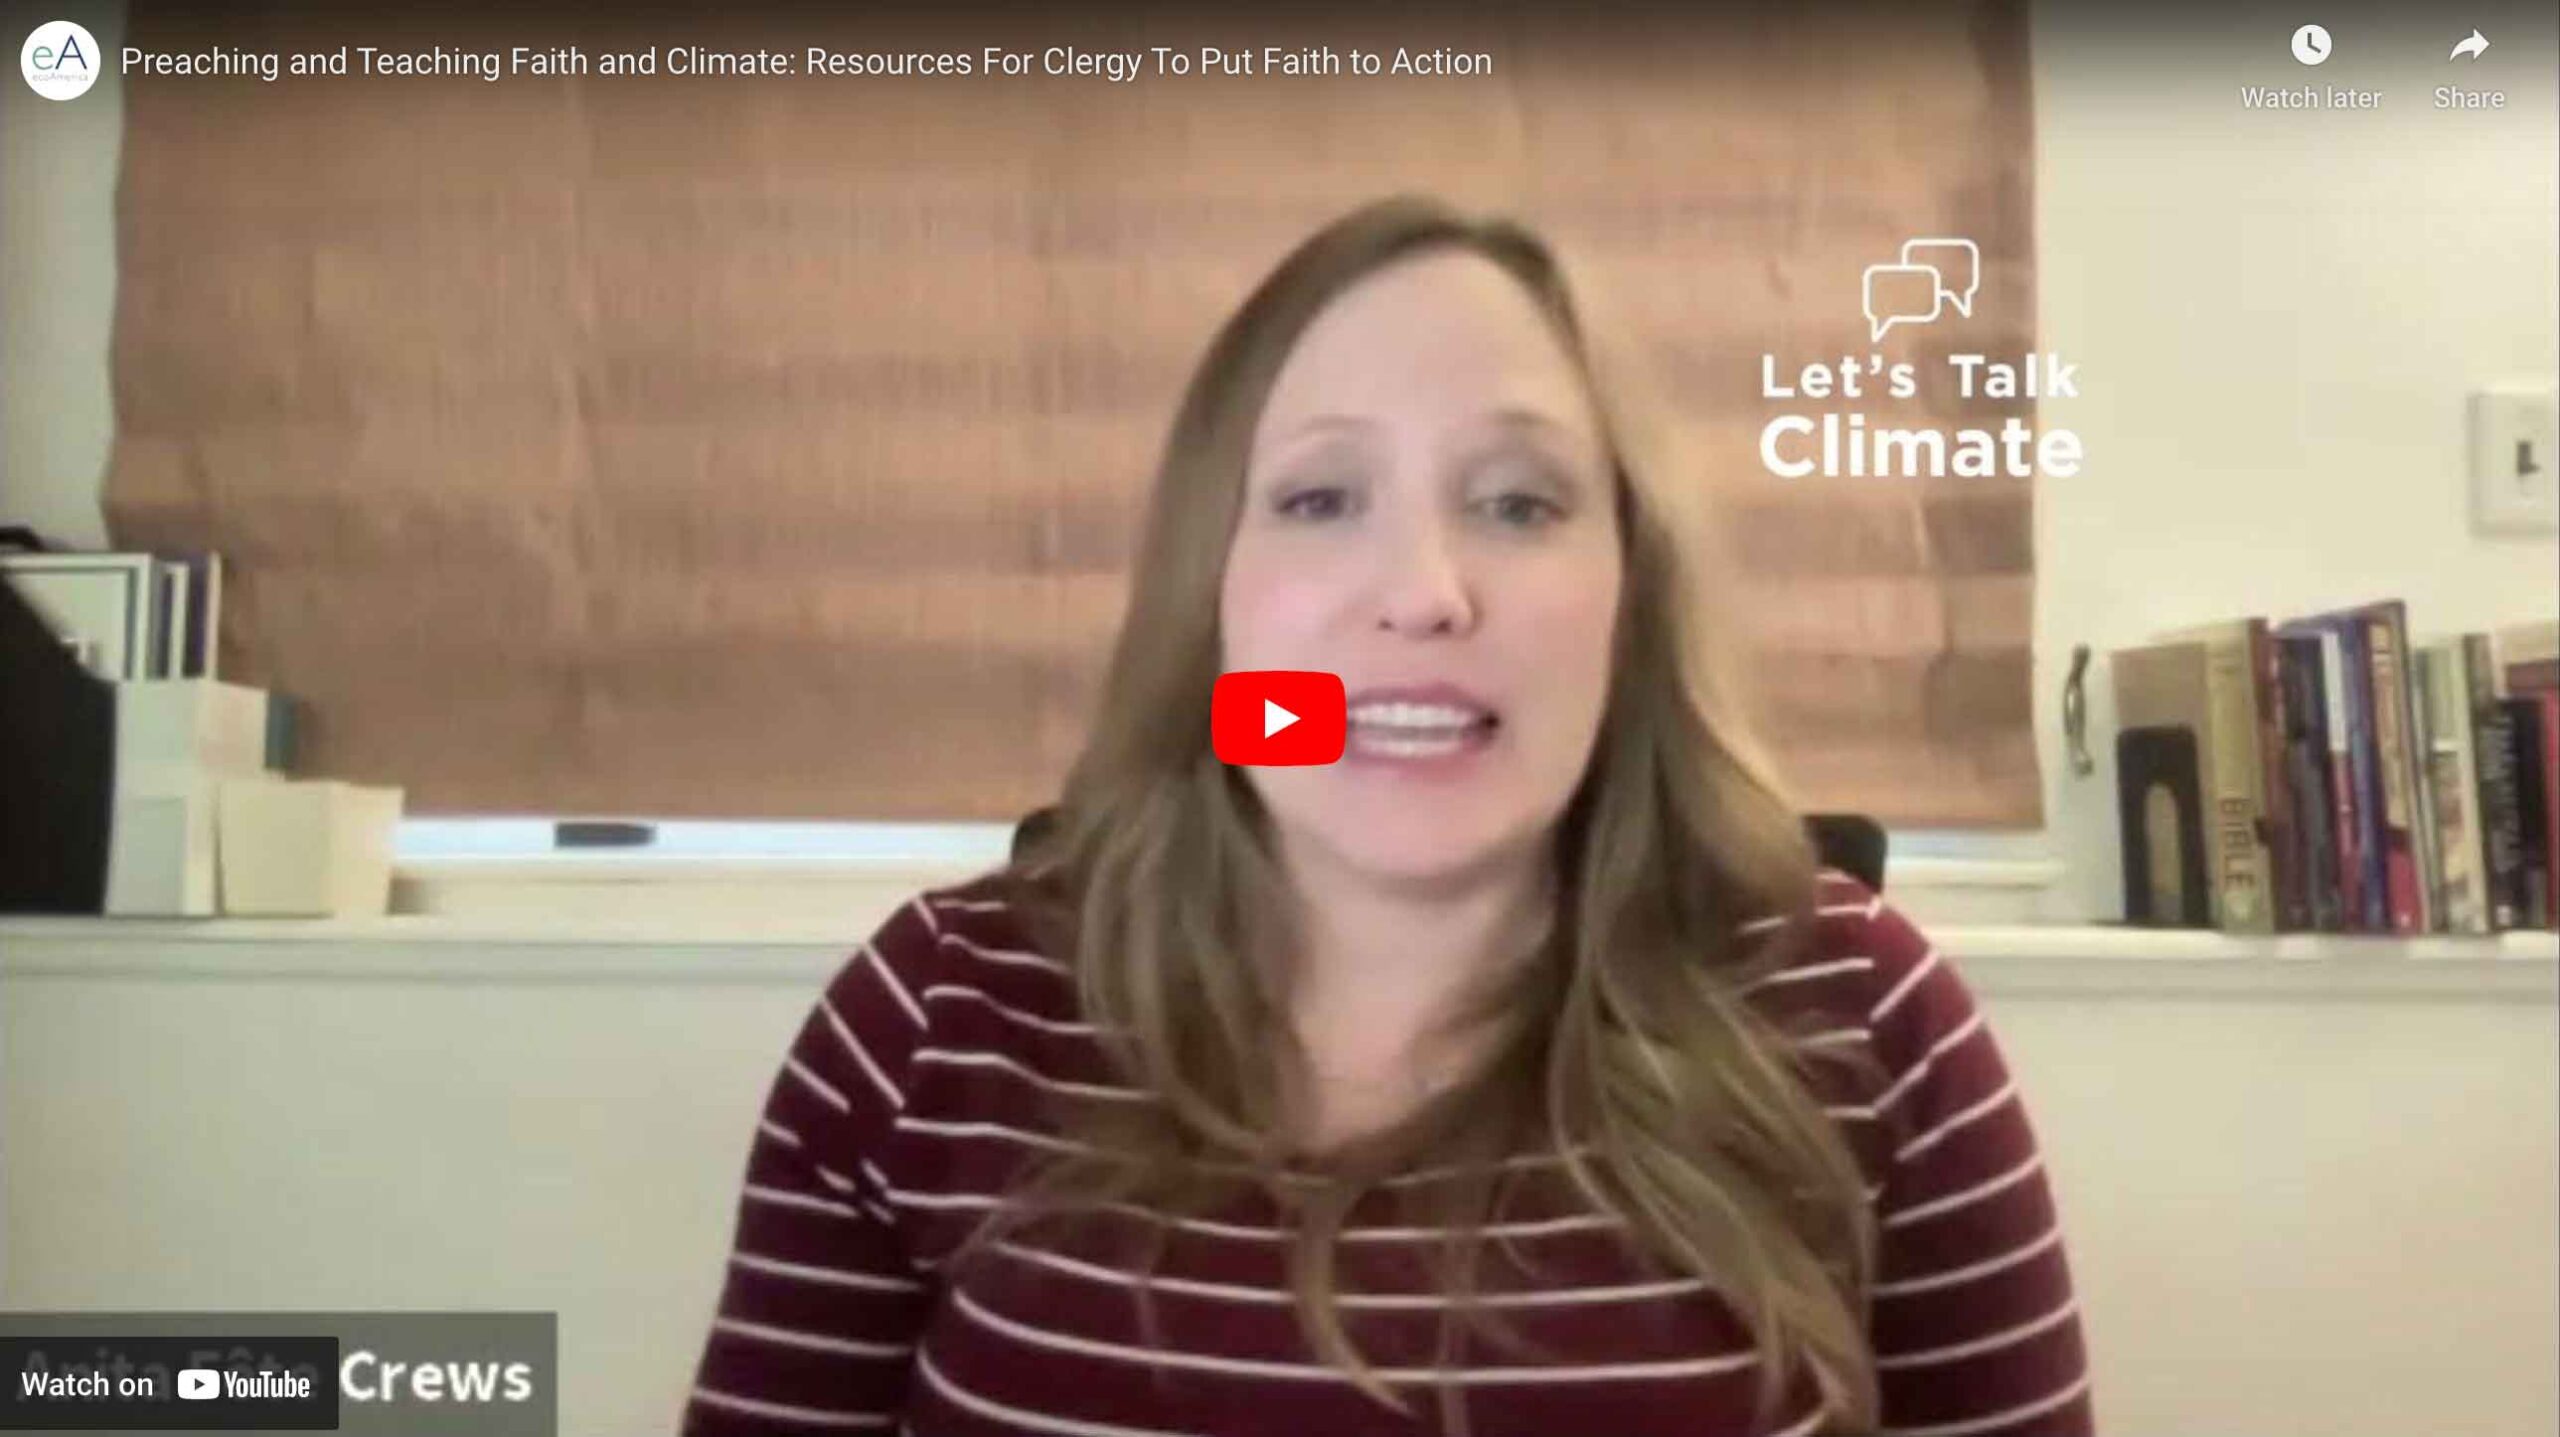 Preaching and Teaching Faith and Climate: Resources For Clergy To Put Faith to Action